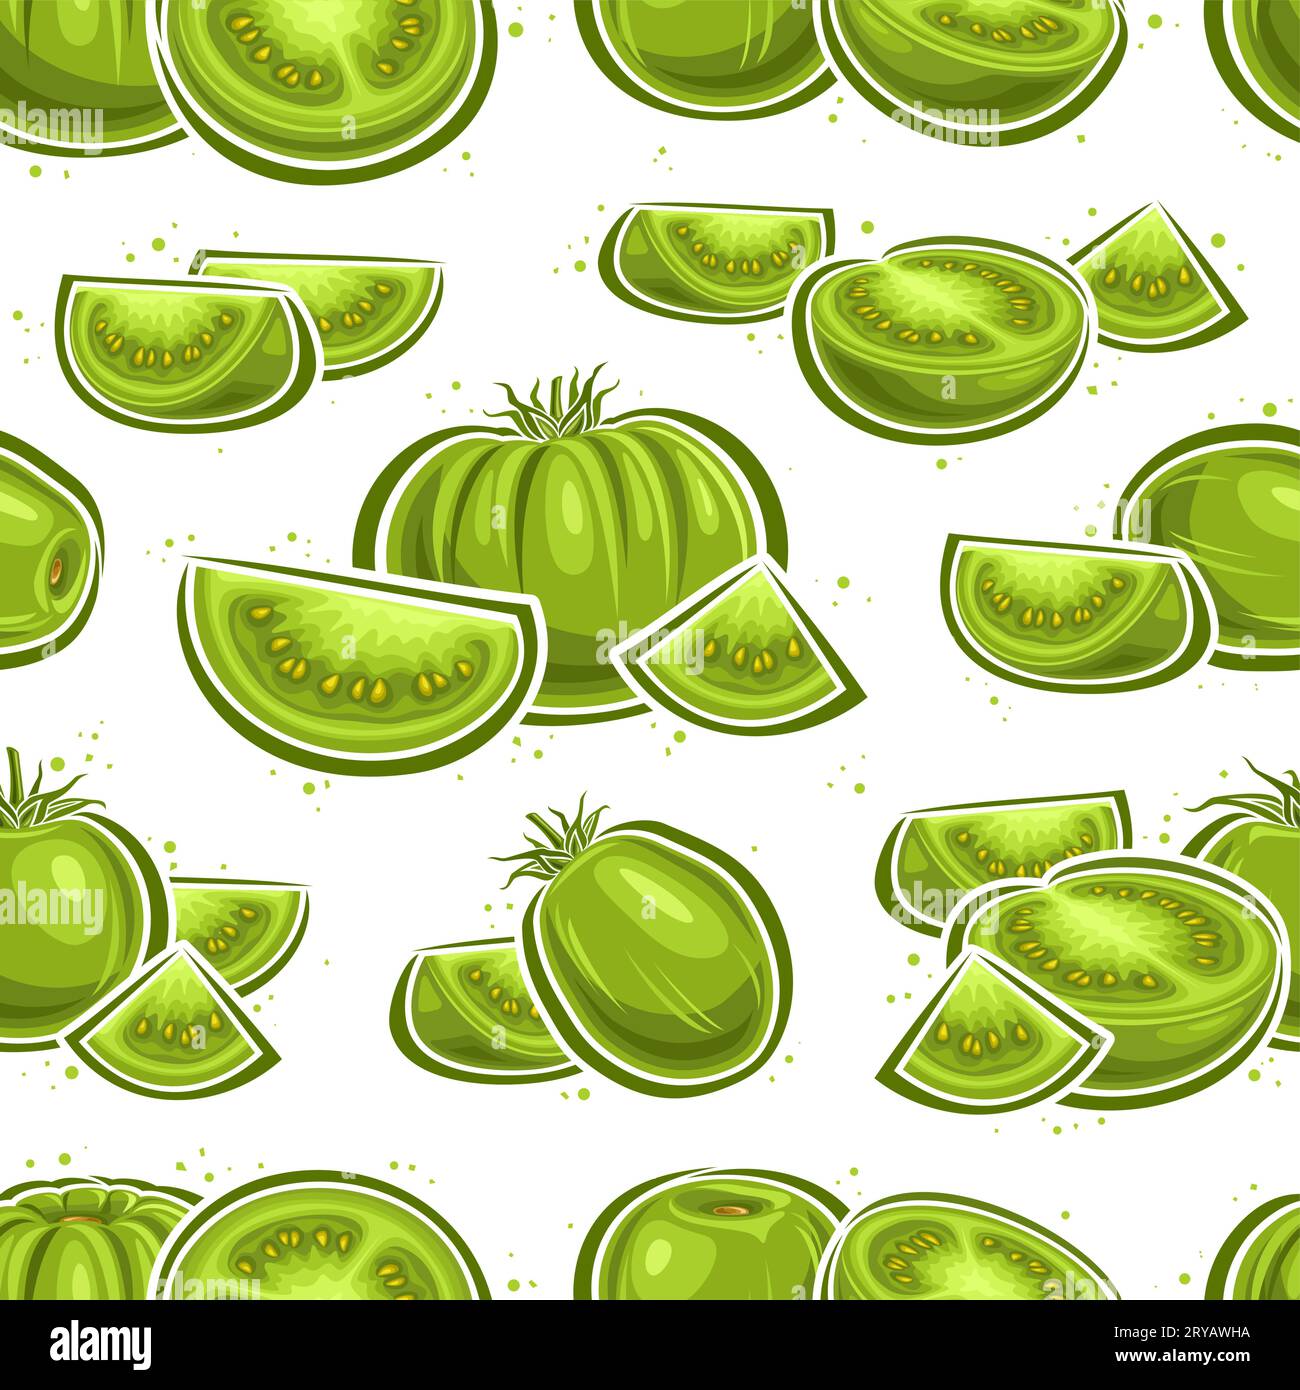 Vector Green Tomato seamless pattern, repeating background with still life compositions of tomatoes for bed linen, decorative square poster with group Stock Vector